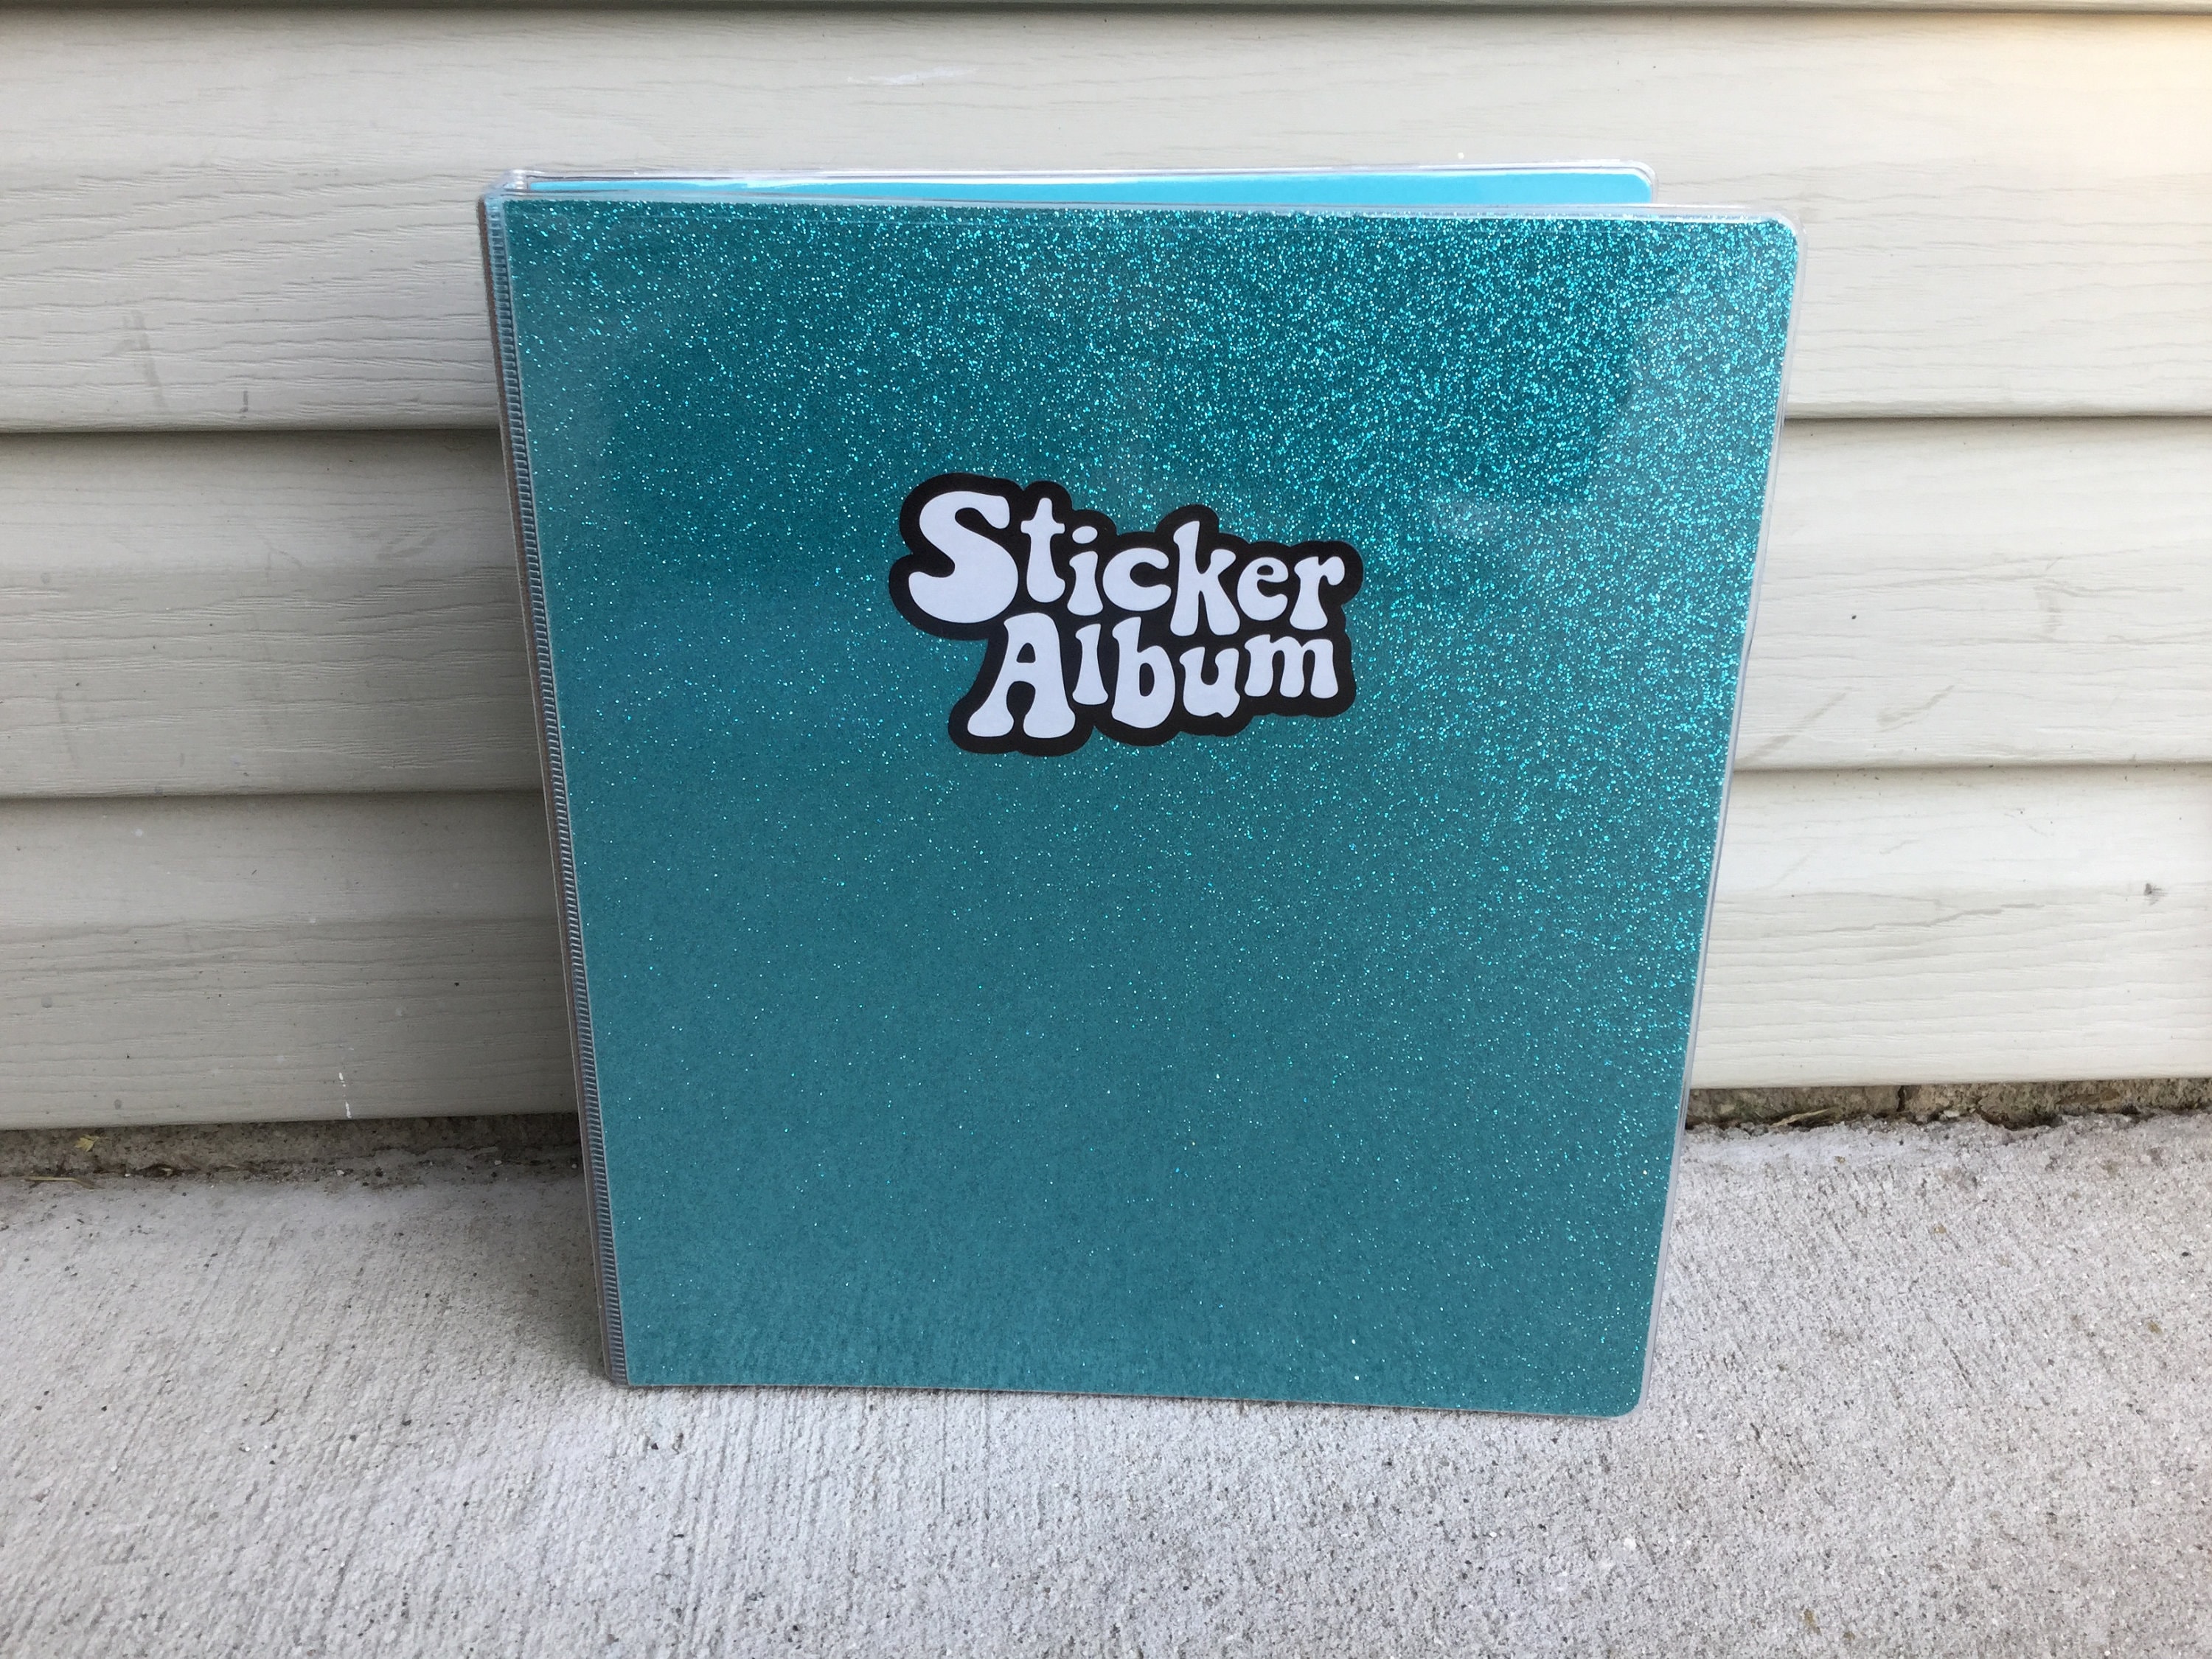 A5/A4 Sticker Release Paper sticker Album, Reusable, Double Sided 